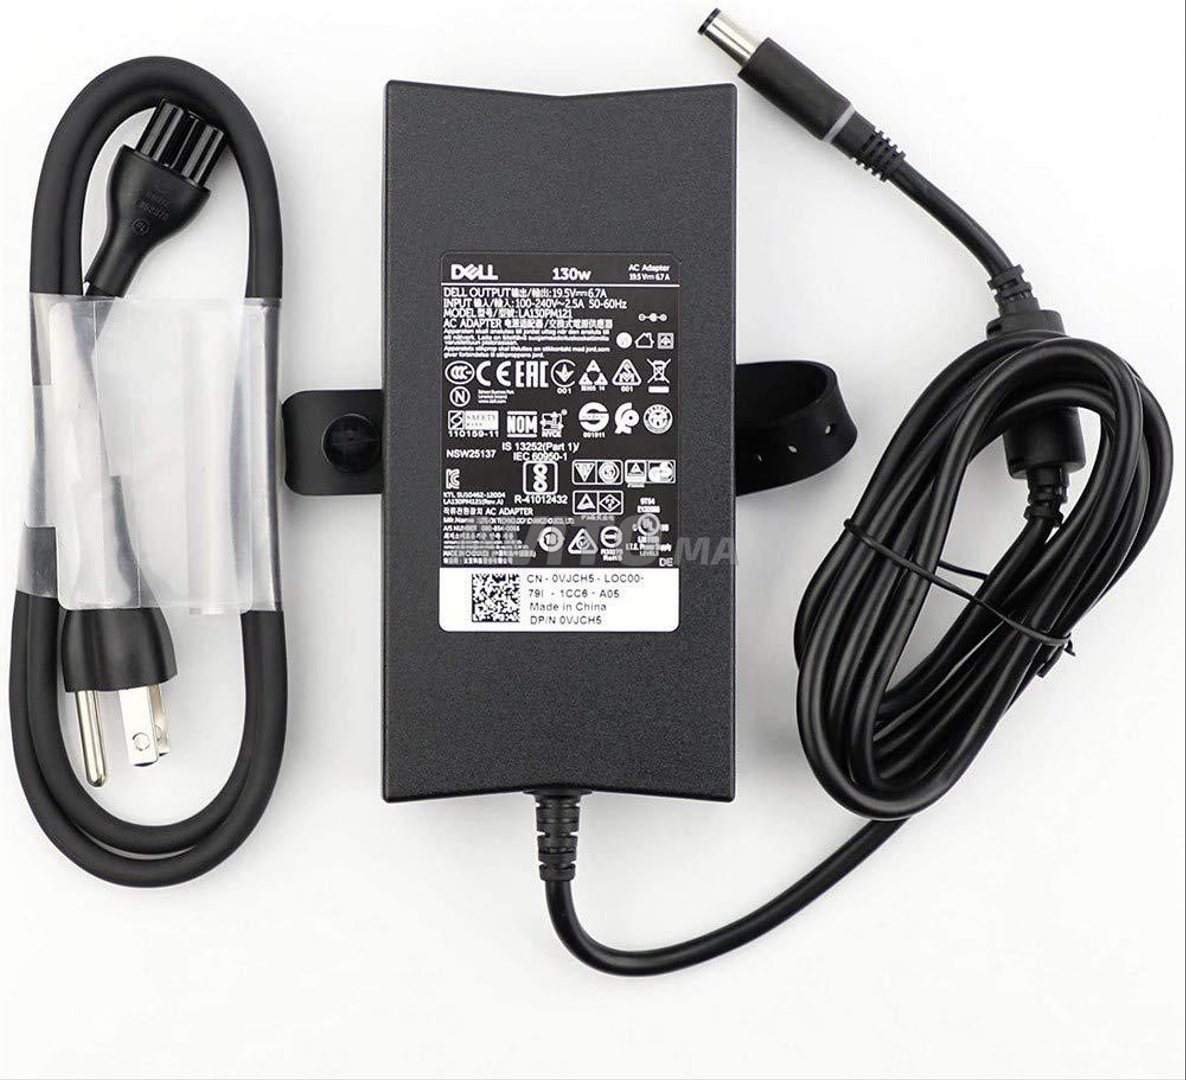 Dell 130W AC Adapter - 5